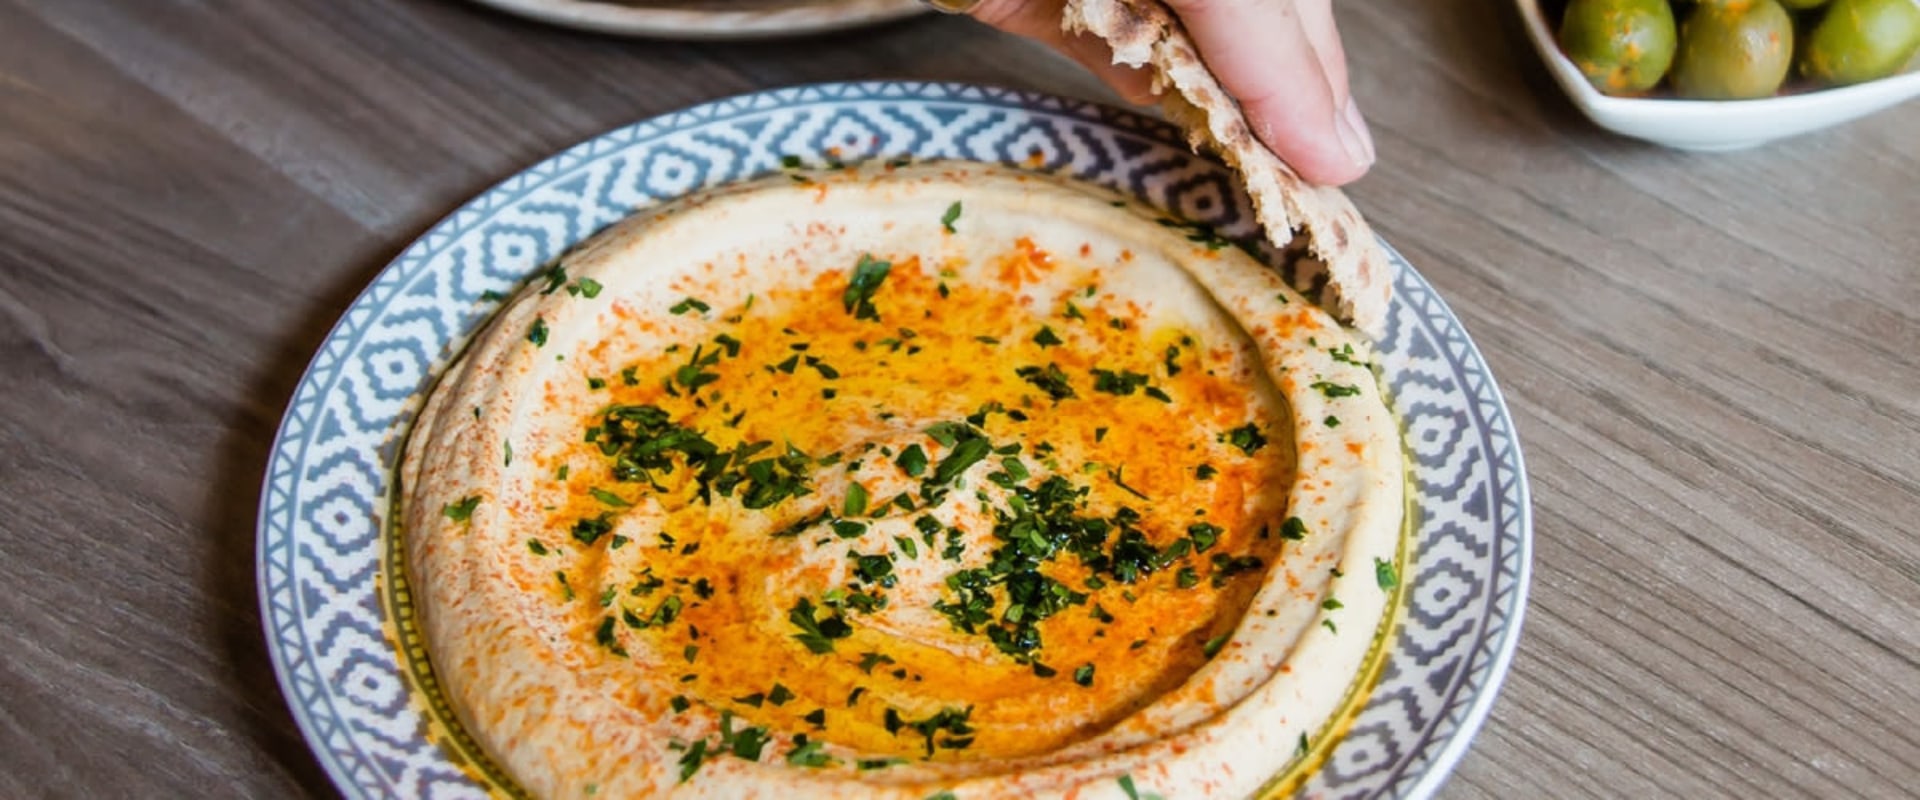 The Best Lebanese Restaurants in Denver, CO for Authentic Hummus: An Expert's Perspective